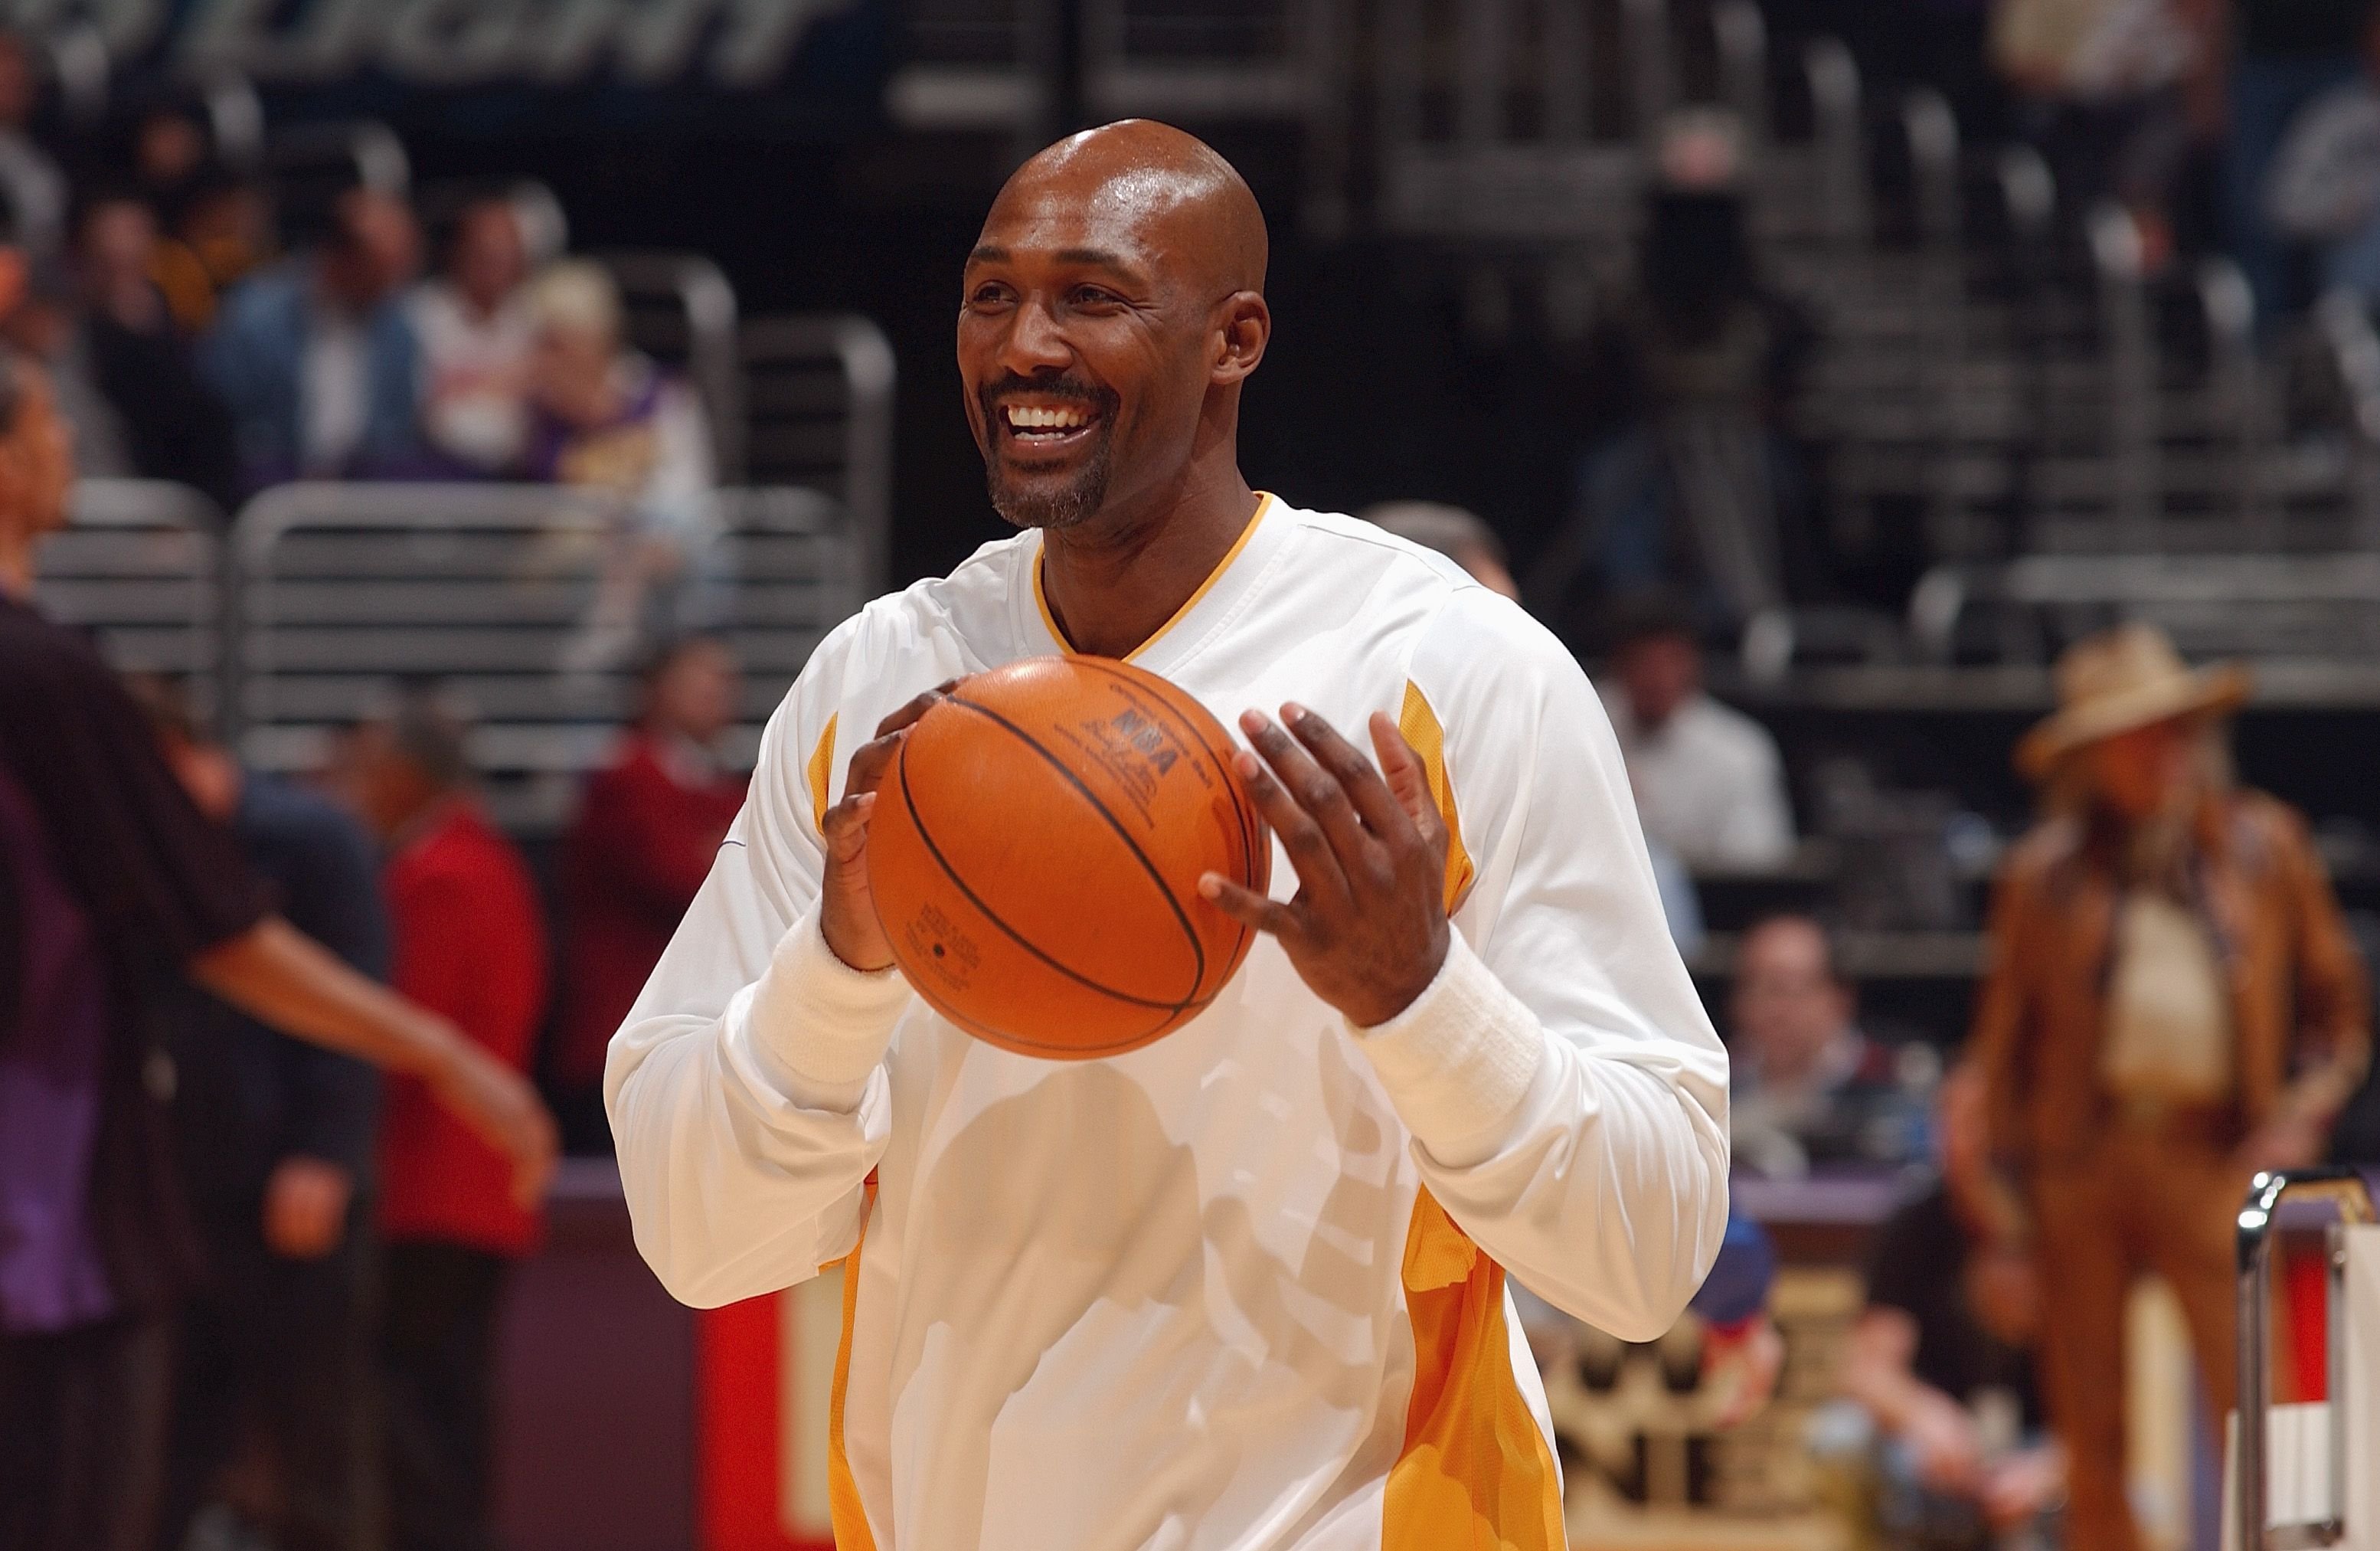 Karl Malone #11 of the Los Angeles Lakers smiles during a game on March 28, 2004 | Photo: Getty Images